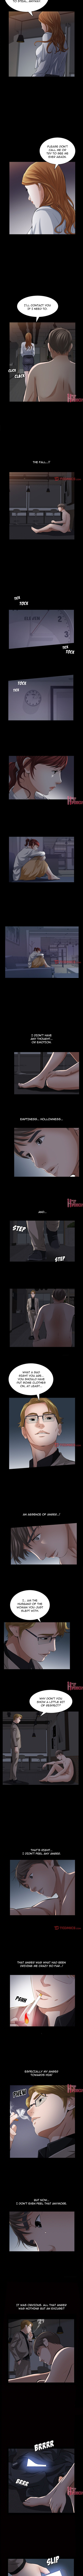 Difficult Choices - Chapter 29 Page 2